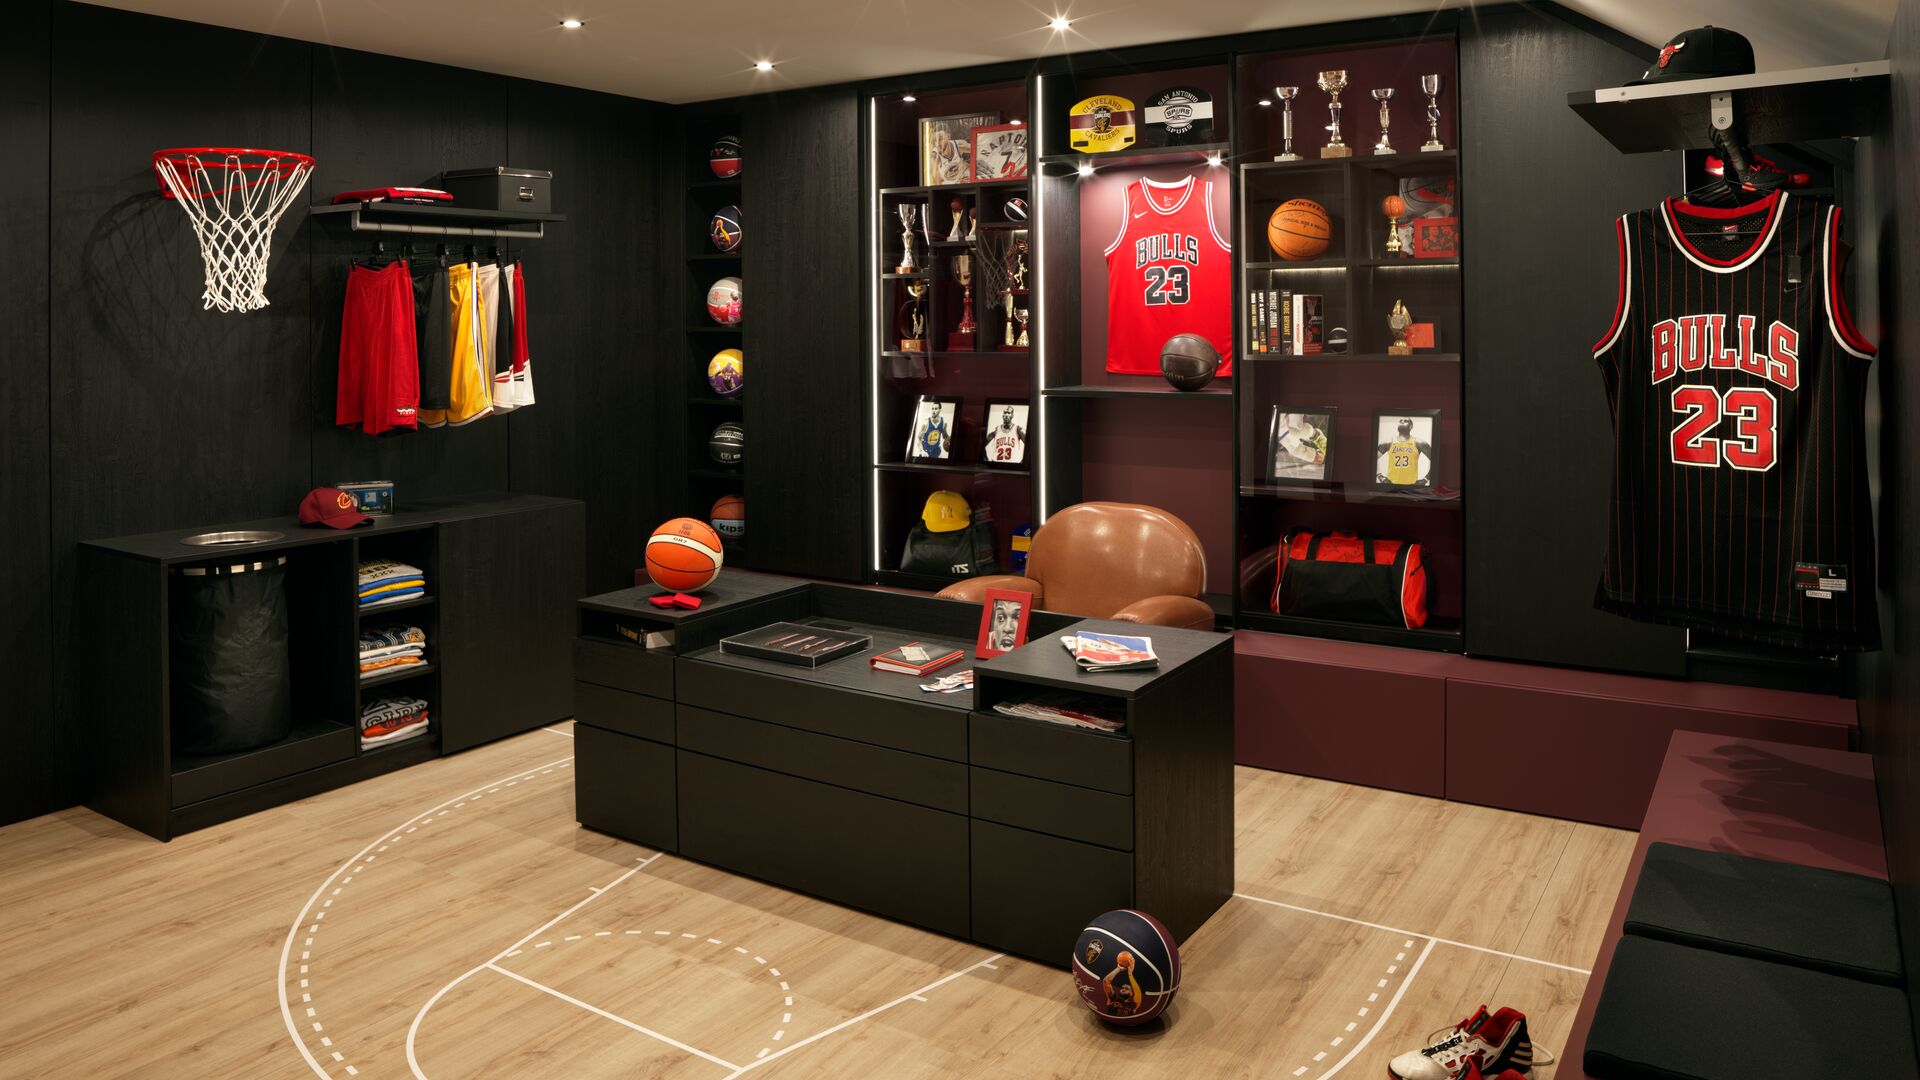 Walk-in wardrobe with island in style of basketball players sports dressing room